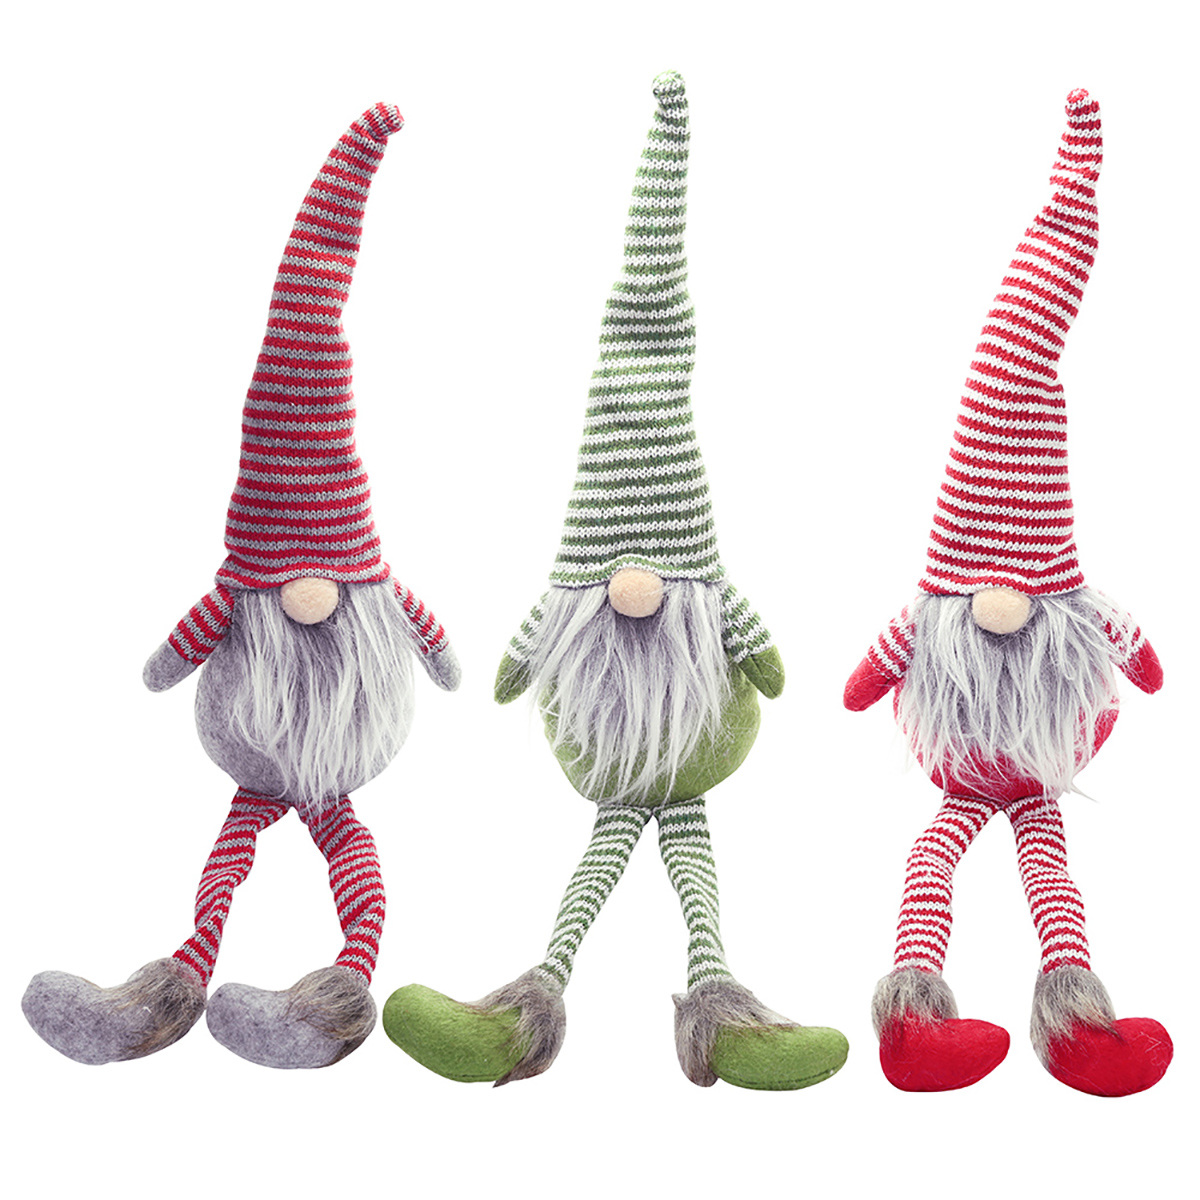 Non-Woven-Hat-With-Long-Legs-Handmade-Gnome-Santa-Christmas-Figurines-Ornament-Decorations-Toys-1636850-2